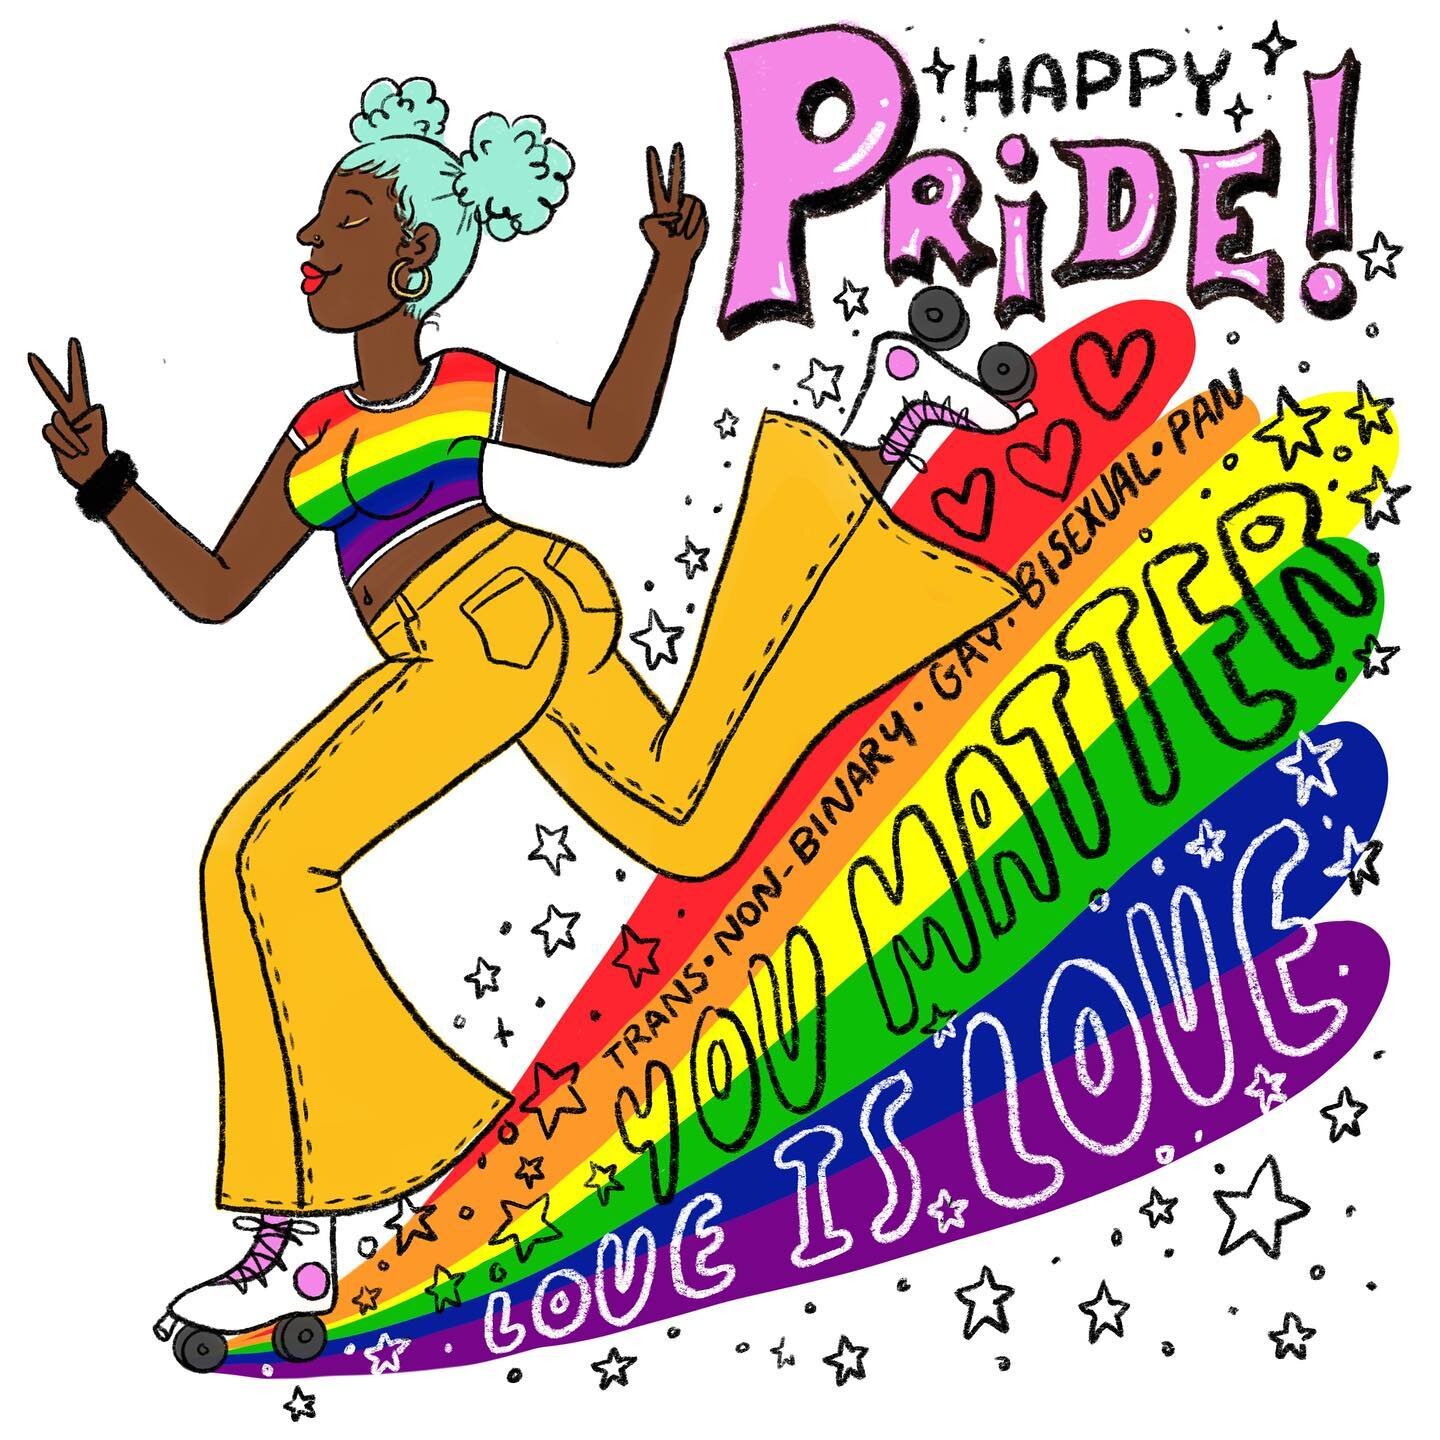 Happy Pride! I hope you feel seen, protected and loved every day but especially this month. #loveislove #happypride #pride #pridemonth 
❤️🧡💛💚💙💜🤎🖤